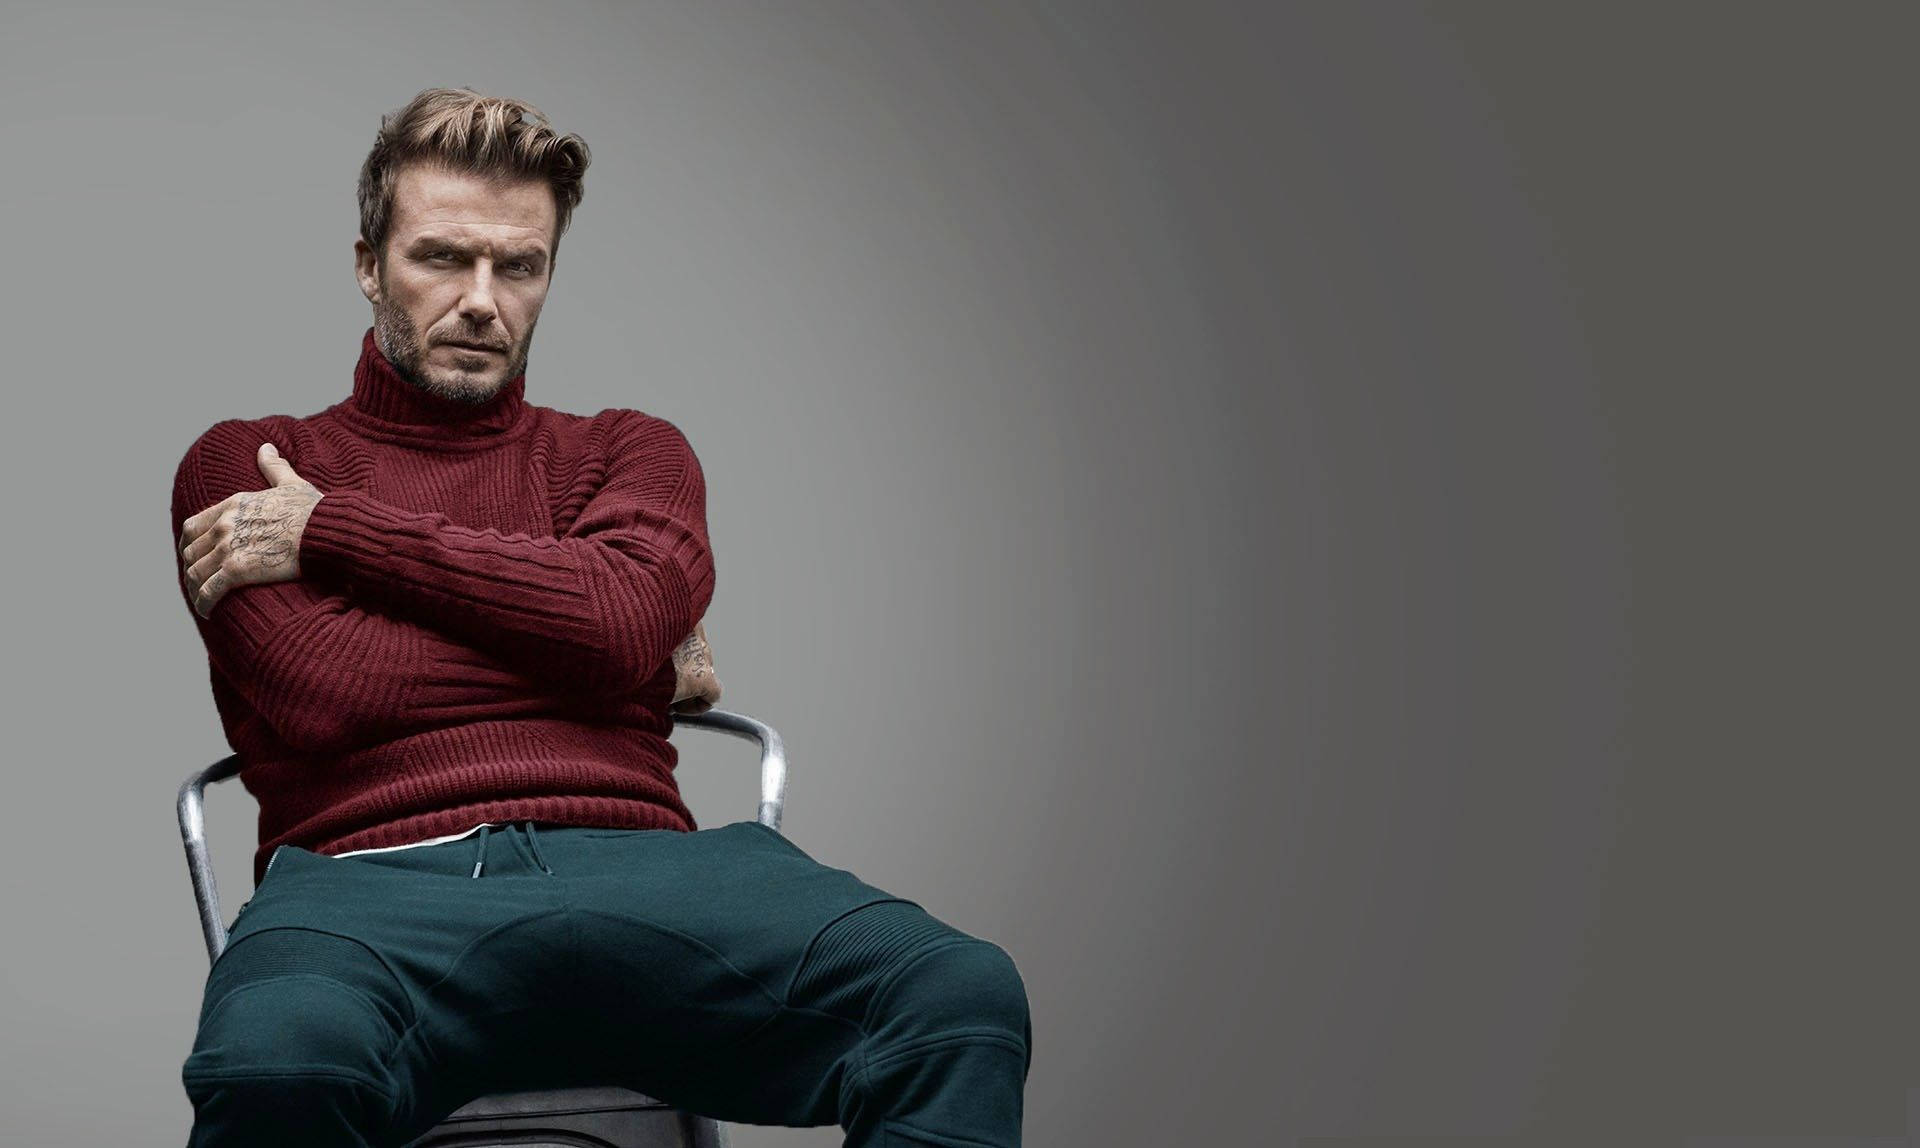 David Beckham Strikes A Pose For Renowned Photographer Rankin Background